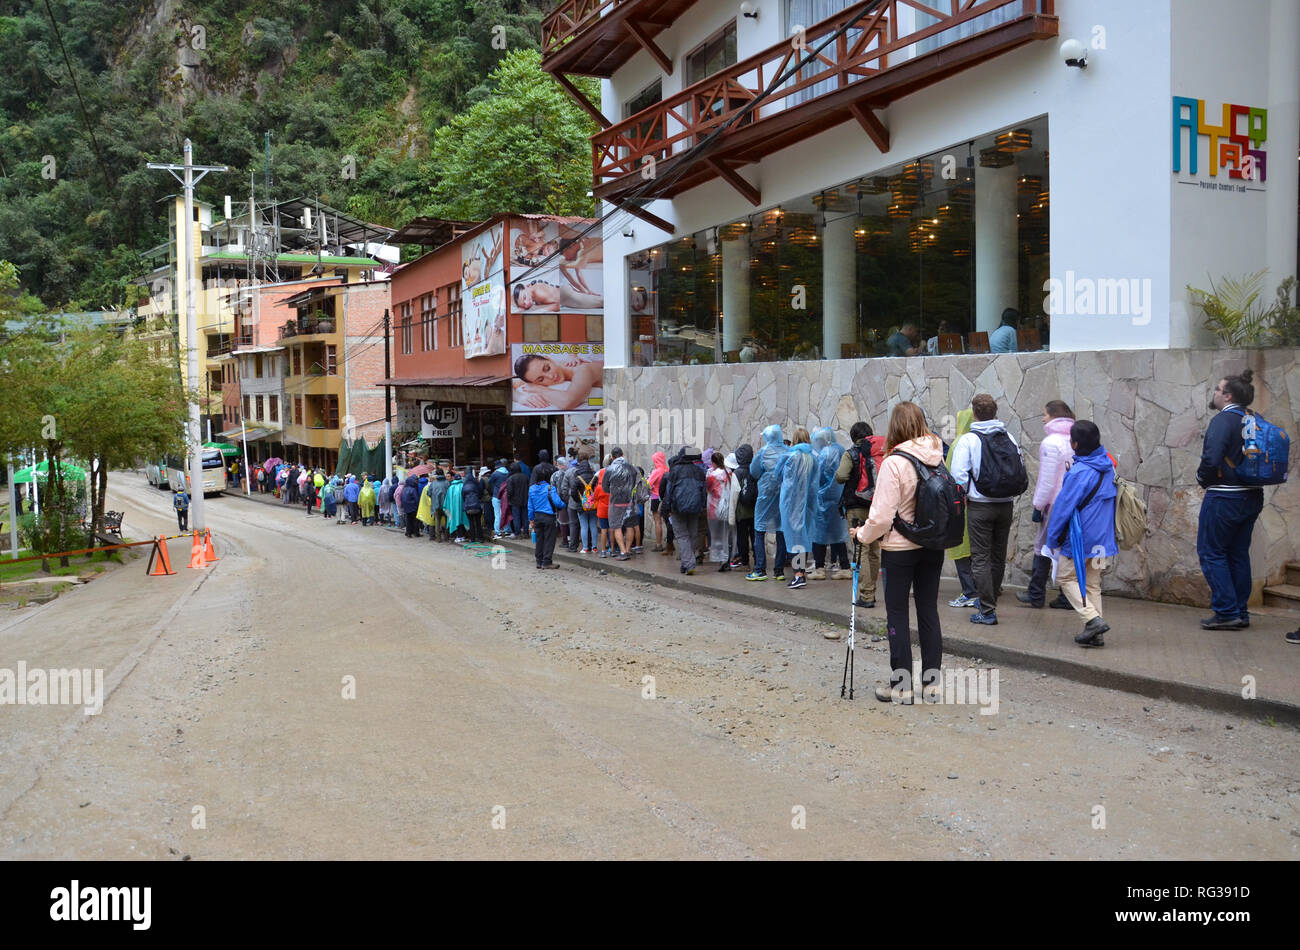 MACHU PICCHU / PERU, August 16, 2018: Tourists line up to get on the buses to go to Machu Picchu Stock Photo